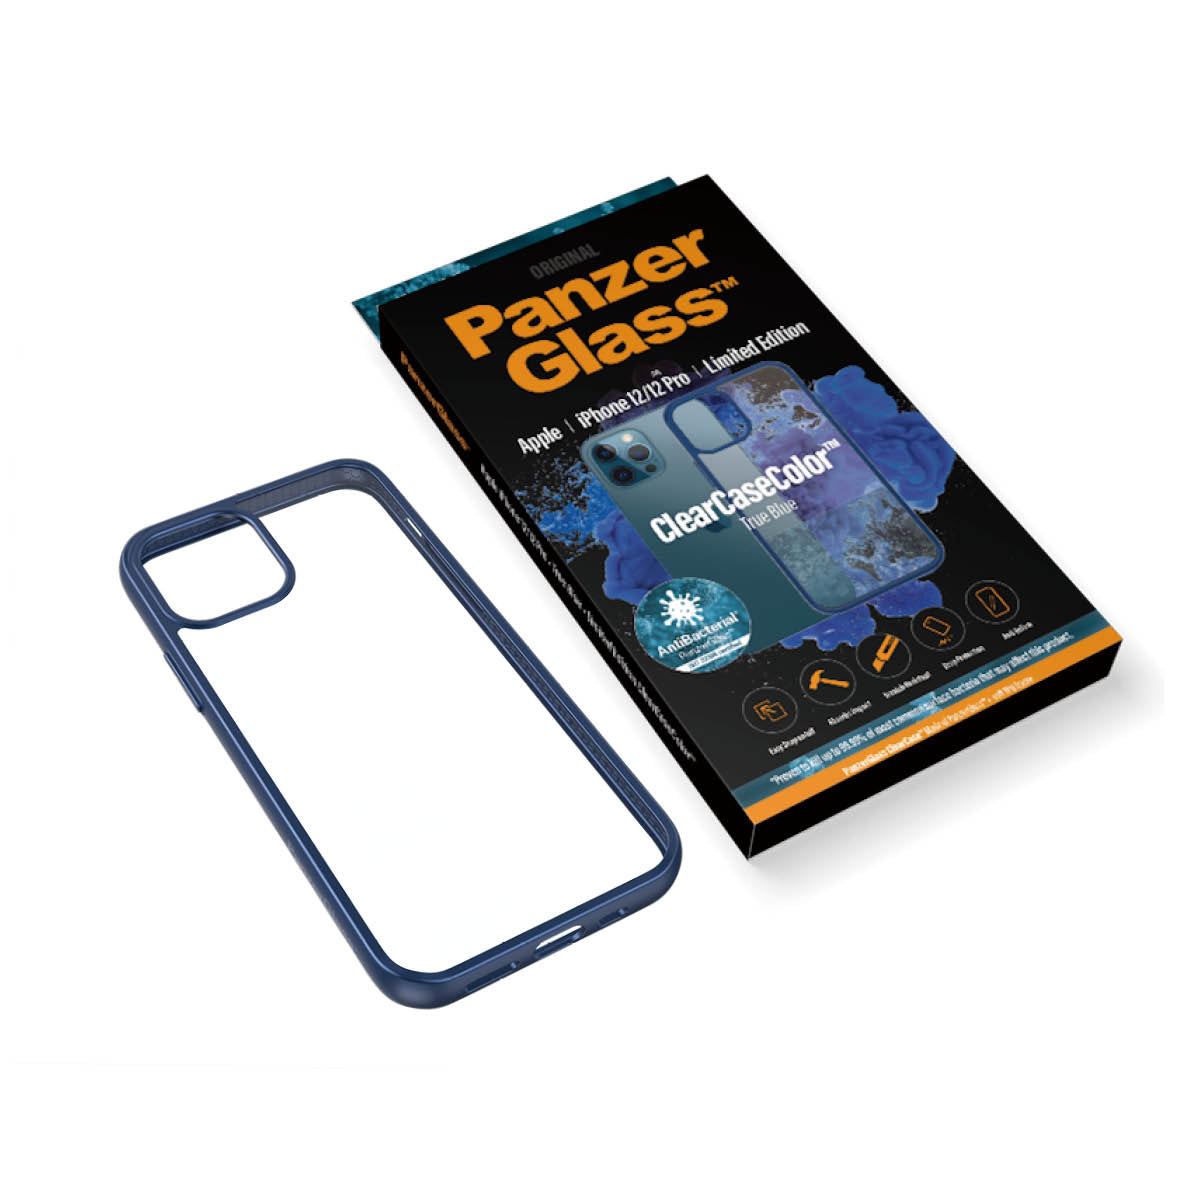 [OPEN BOX] PANZERGLASS iPhone 12/12 Pro ClearCase - Drop Protection Treated w/ AntiMicrobial - True Blue